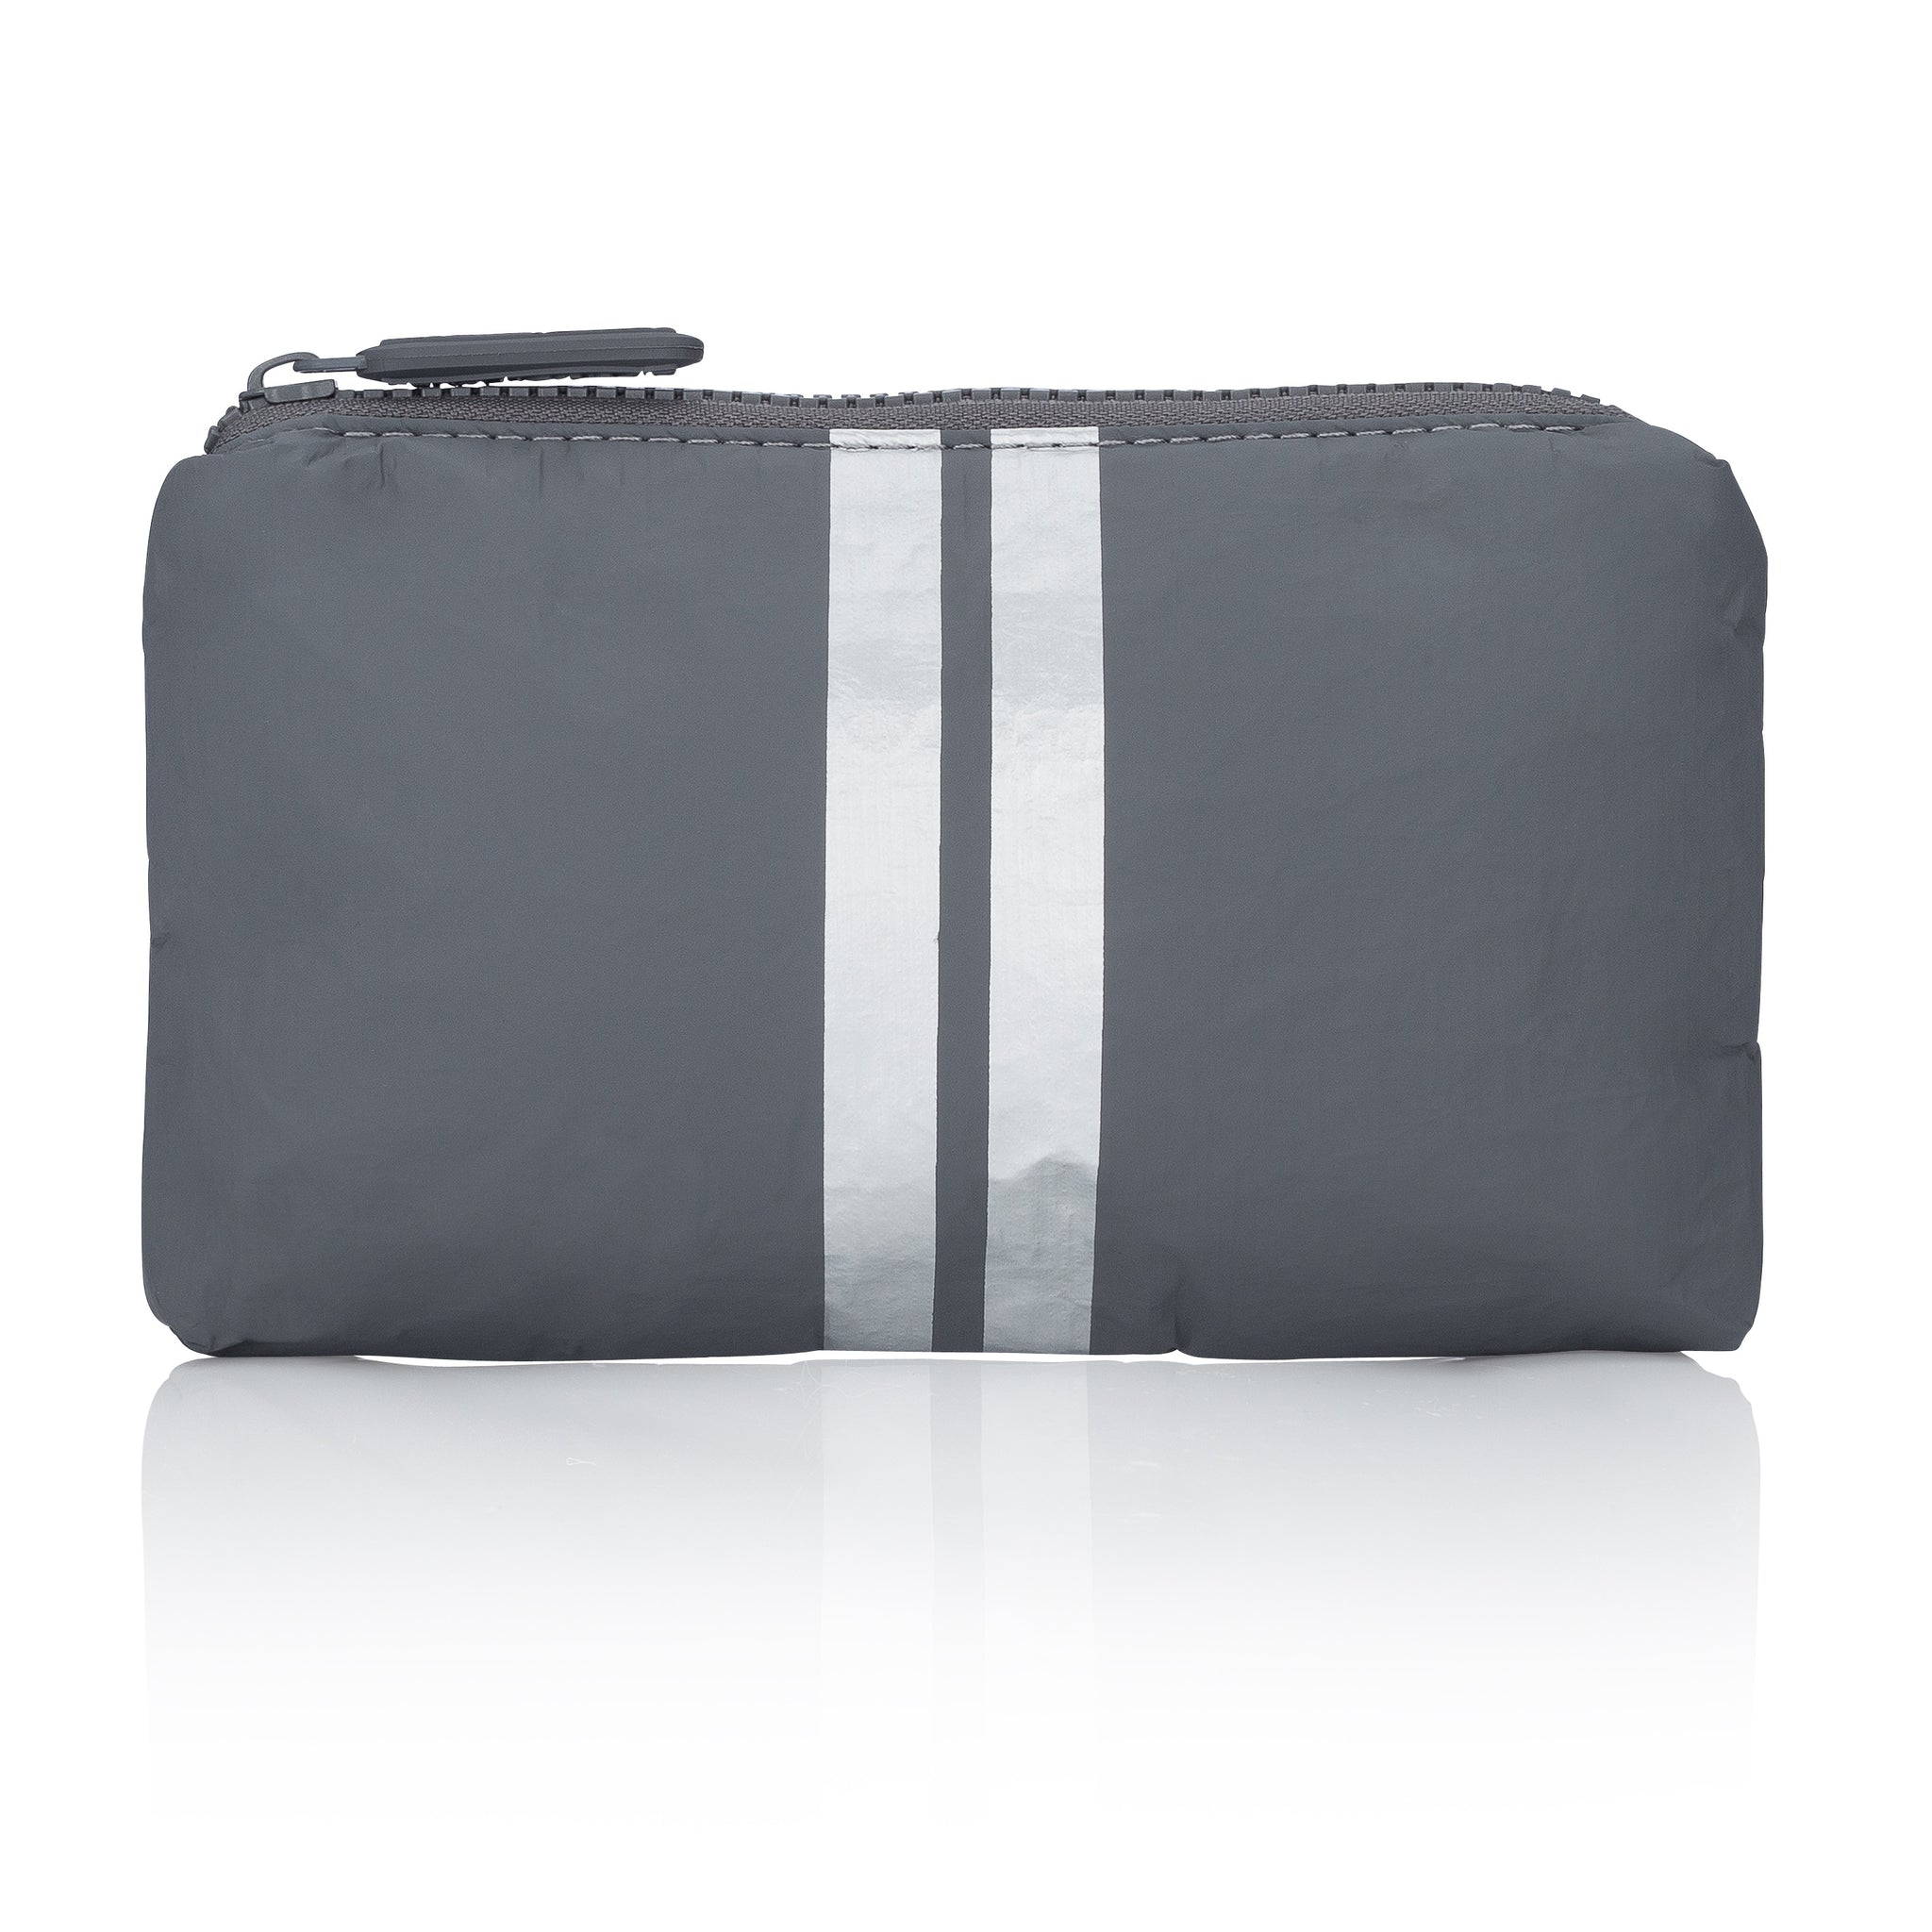 Cute Travel Clutch - Mini Padded Pack - Cool Gray HLT Collection with Metallic Silver Stripes